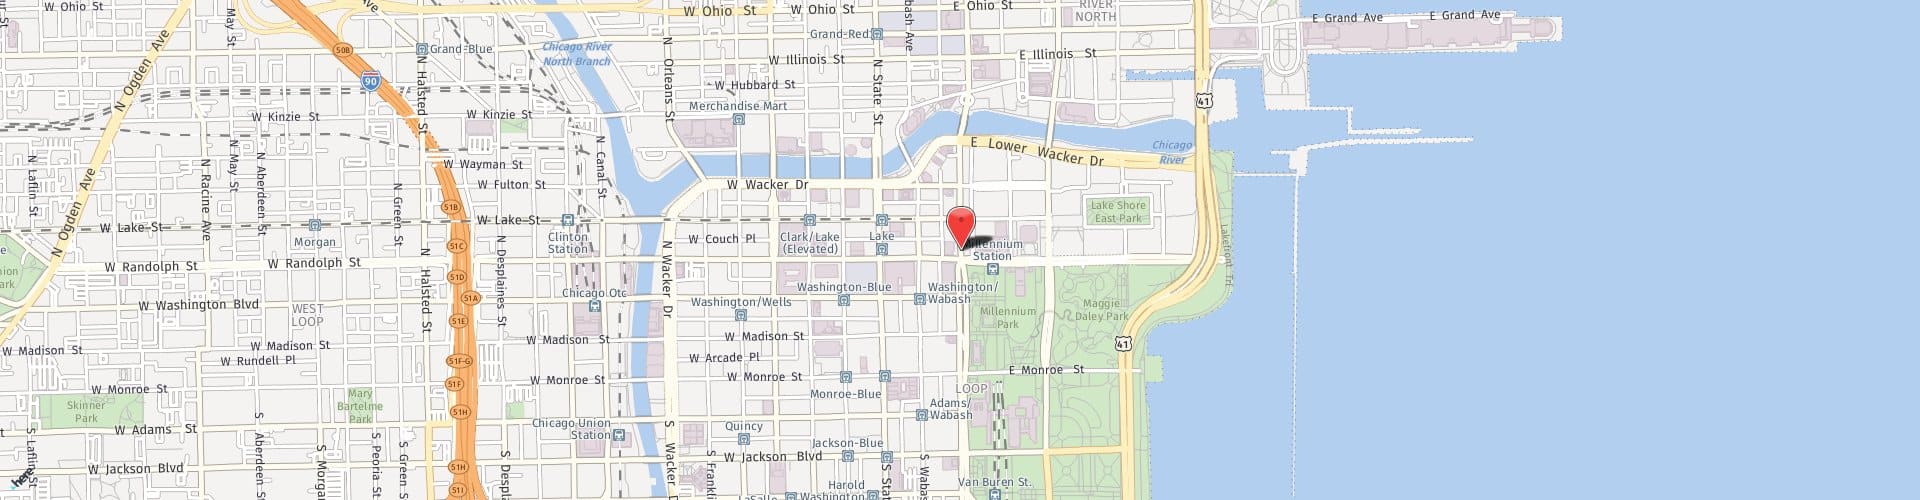 Location Map: 151 N Michigan Ave Chicago, IL 60601